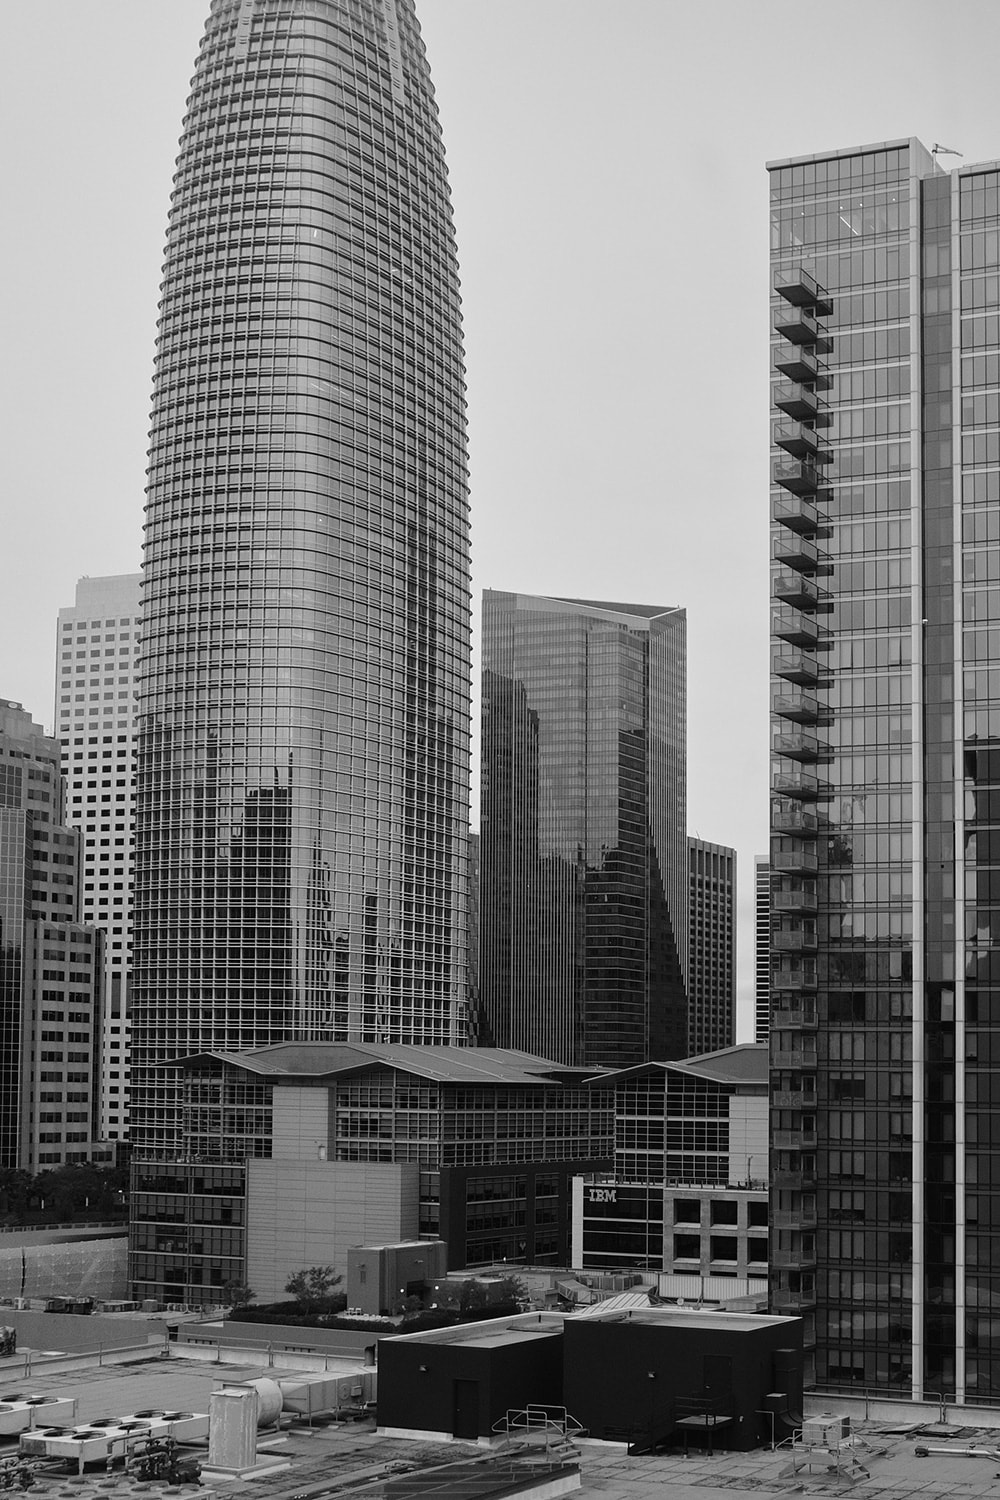 Black and white portrait photo of the Salesforce Tower in the South of Market district of downtown San Francisco.